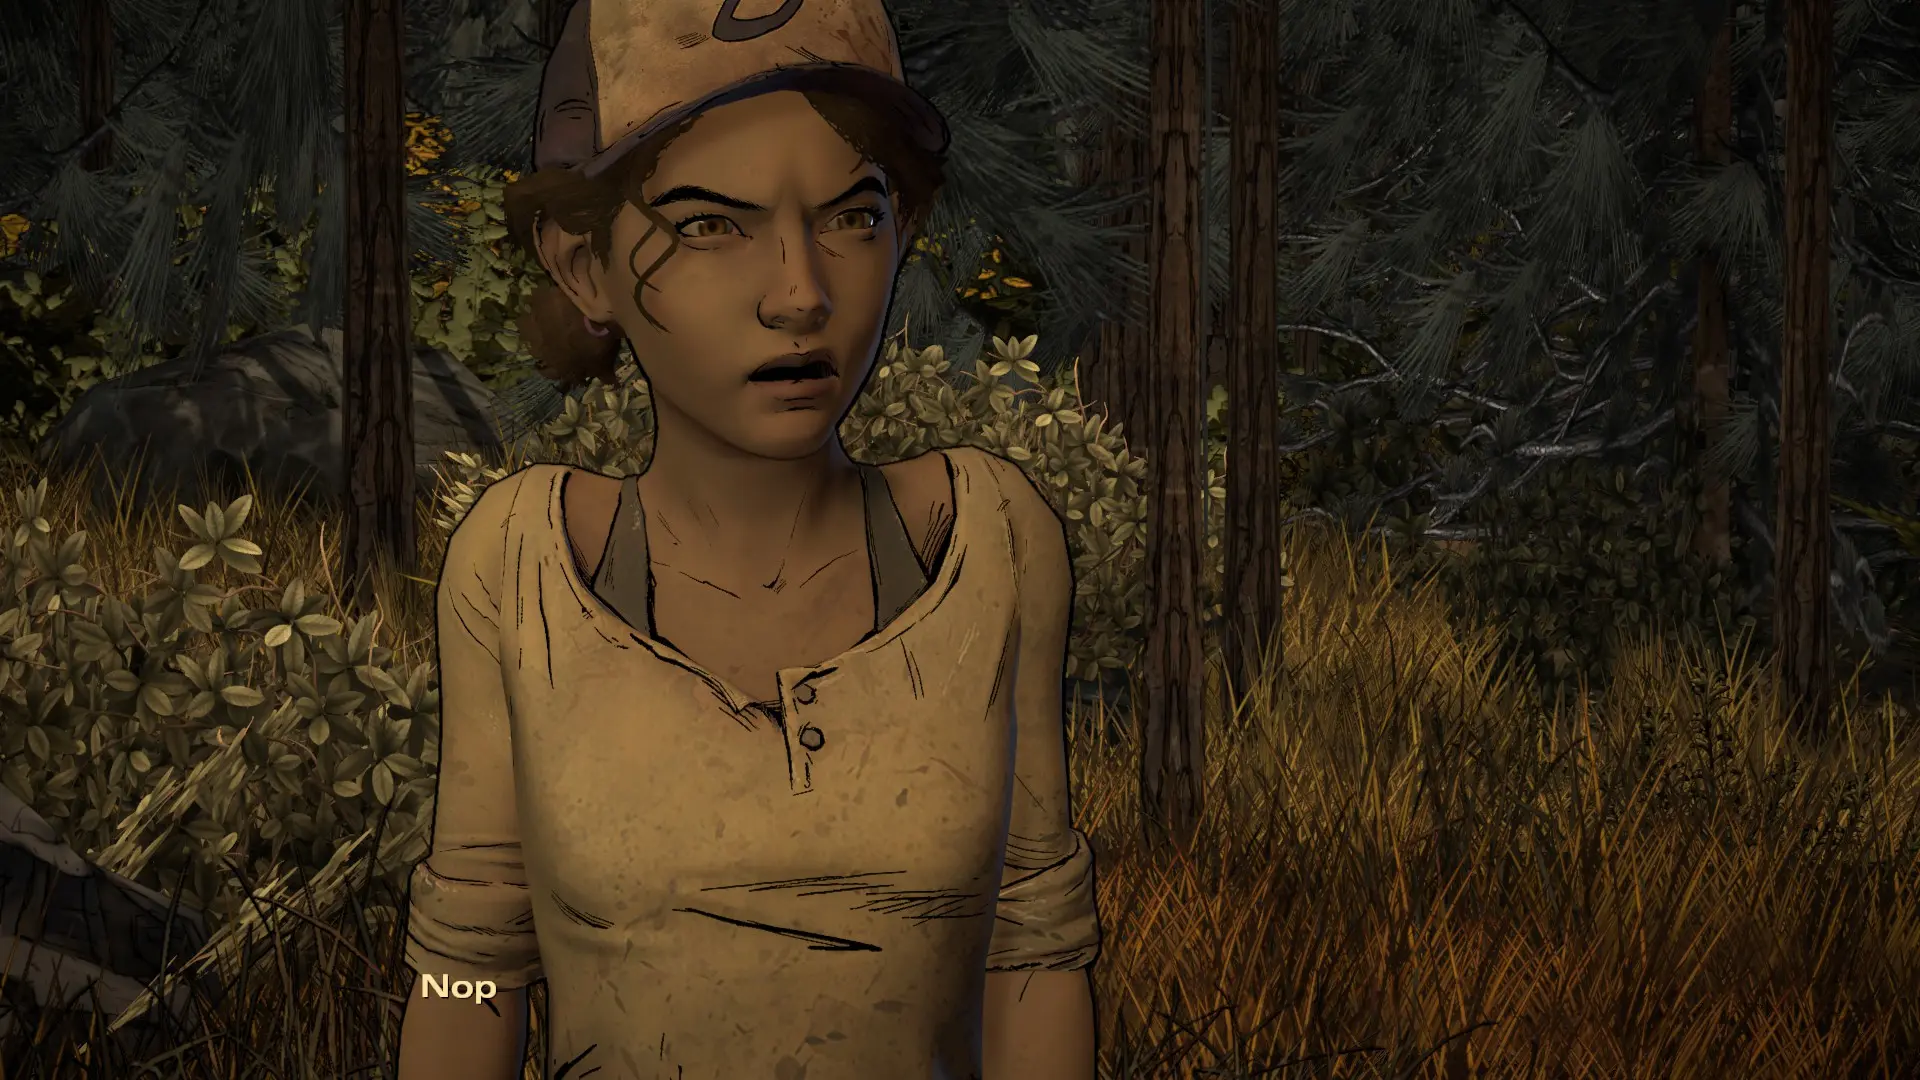 S3 Clem Replaces S2 Clem At The Walking Dead The Telltale Definitive Series Nexus Mods And 4710